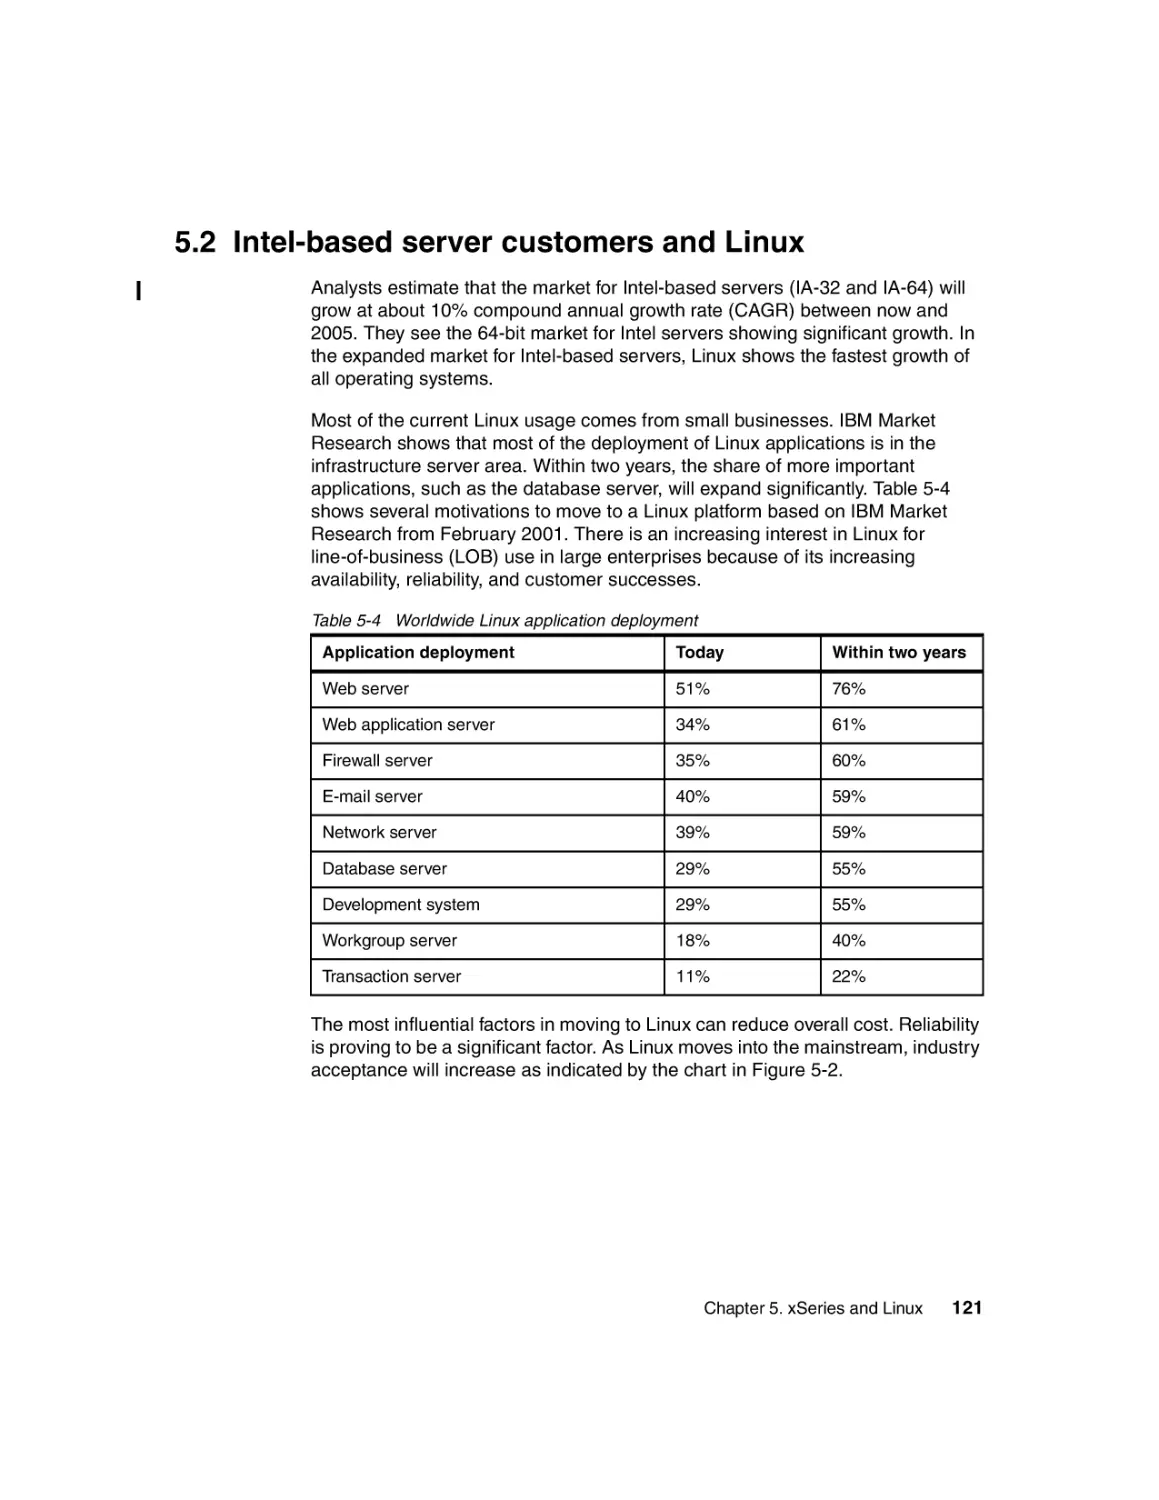 5.2 Intel-based server customers and Linux